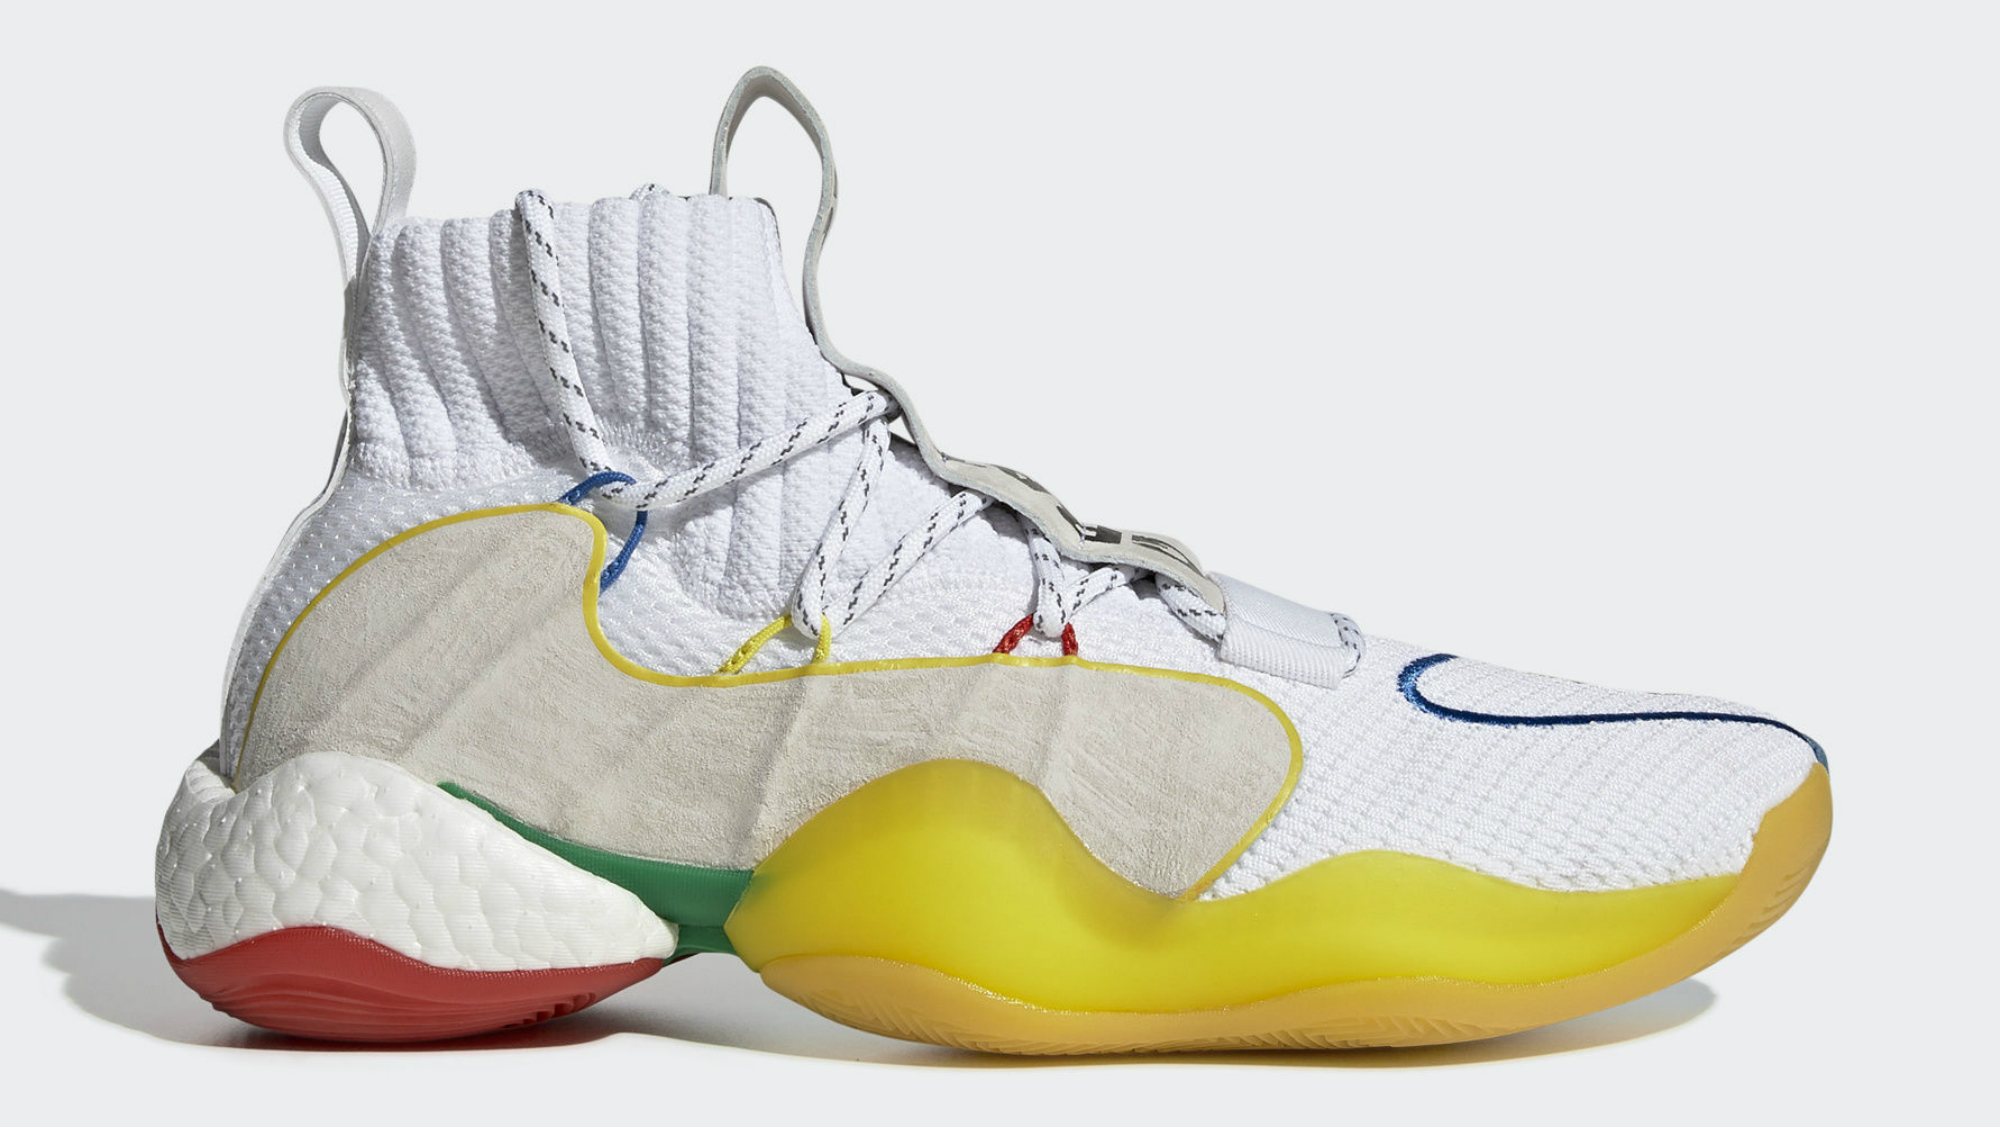 pharrell williams adidas crazy byw white ef3500 release date